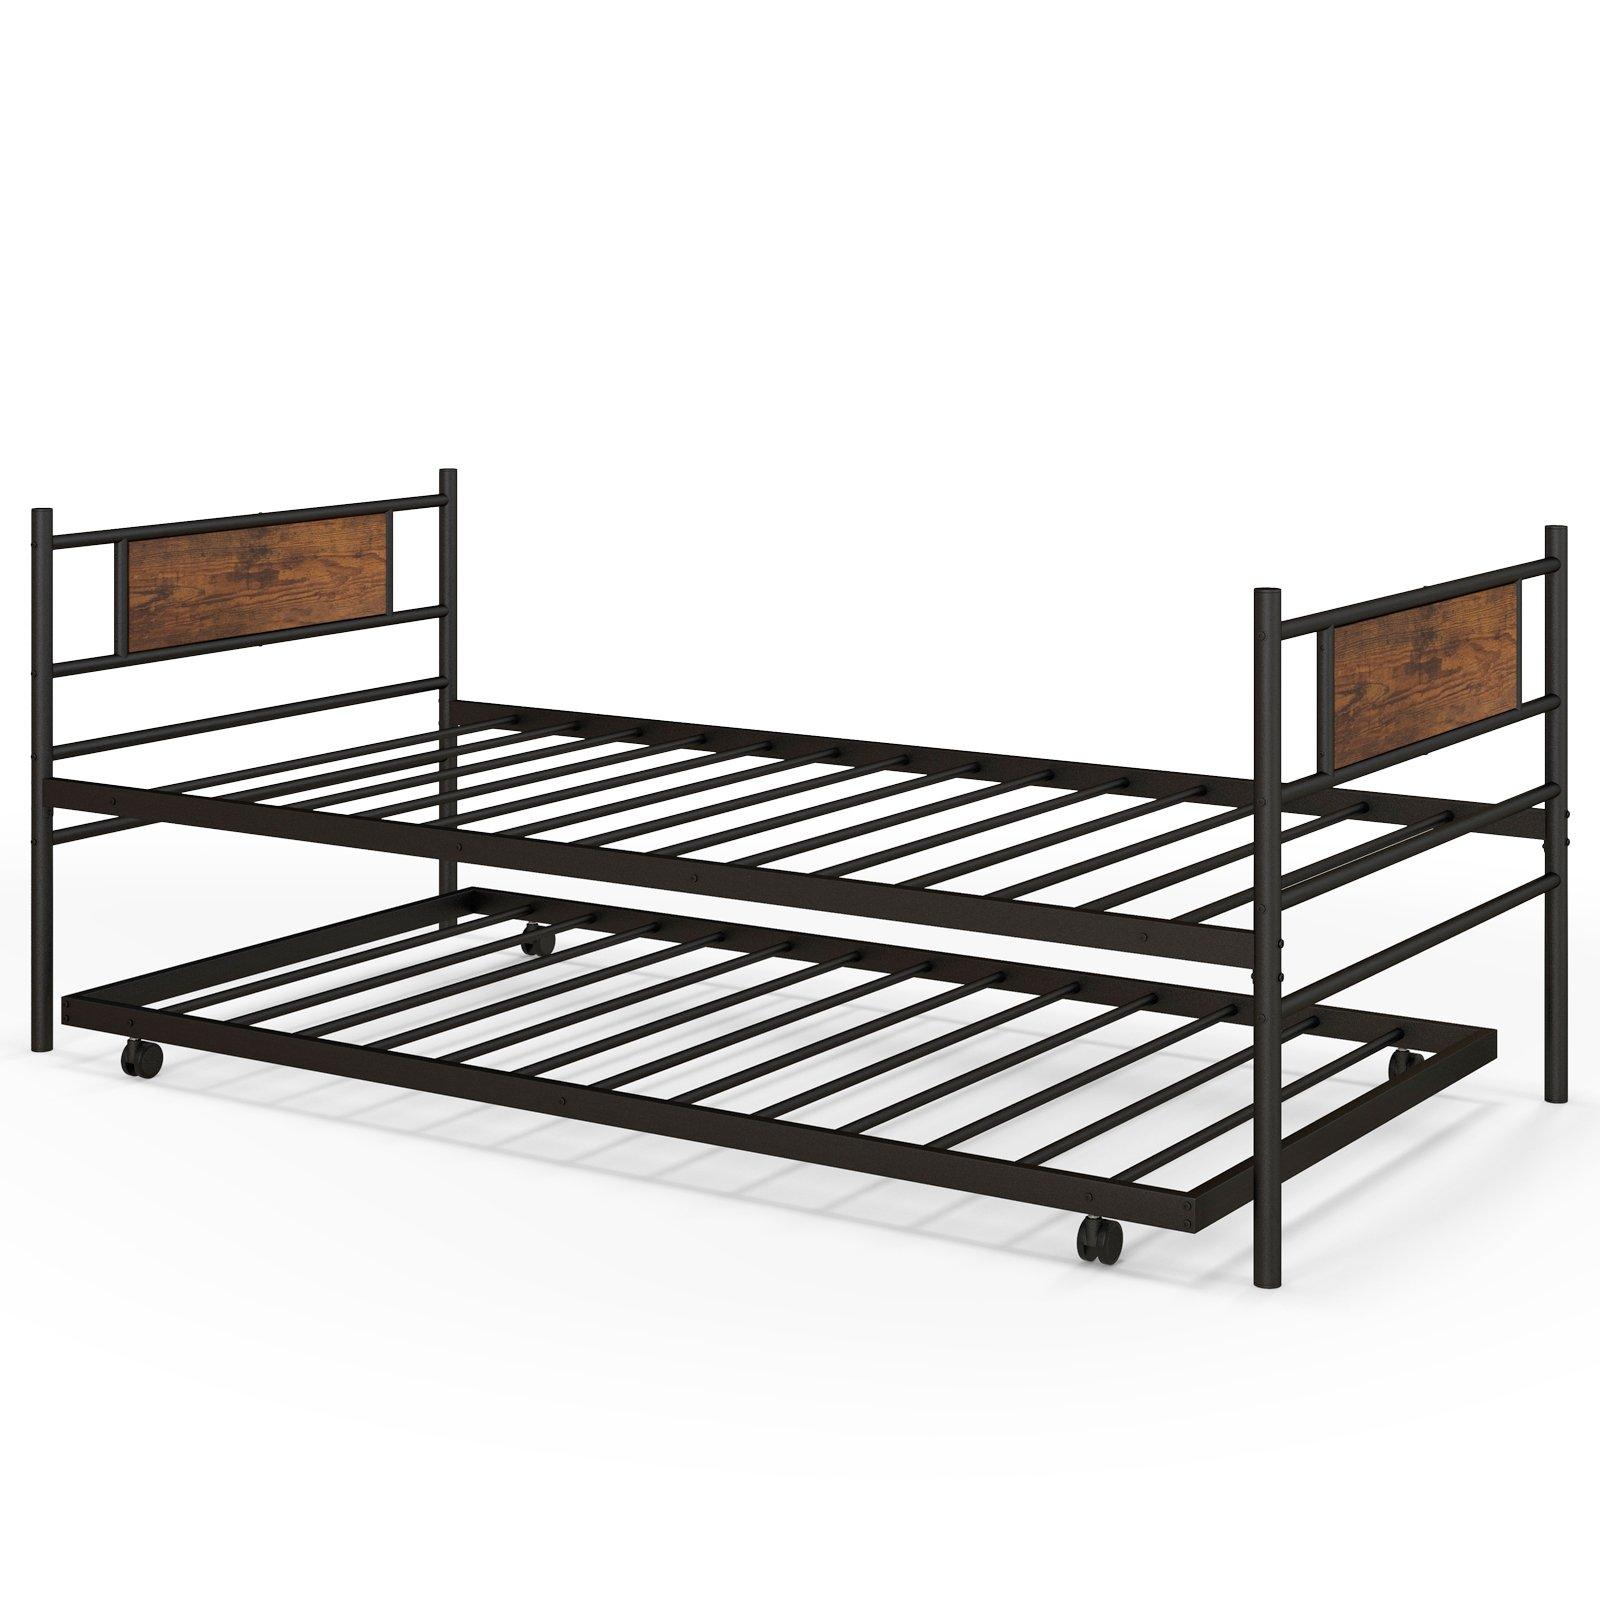 Single Metal Daybed Sofa Bed Dual-use Guest Bed W/ Pull-out Trundle Space Saving